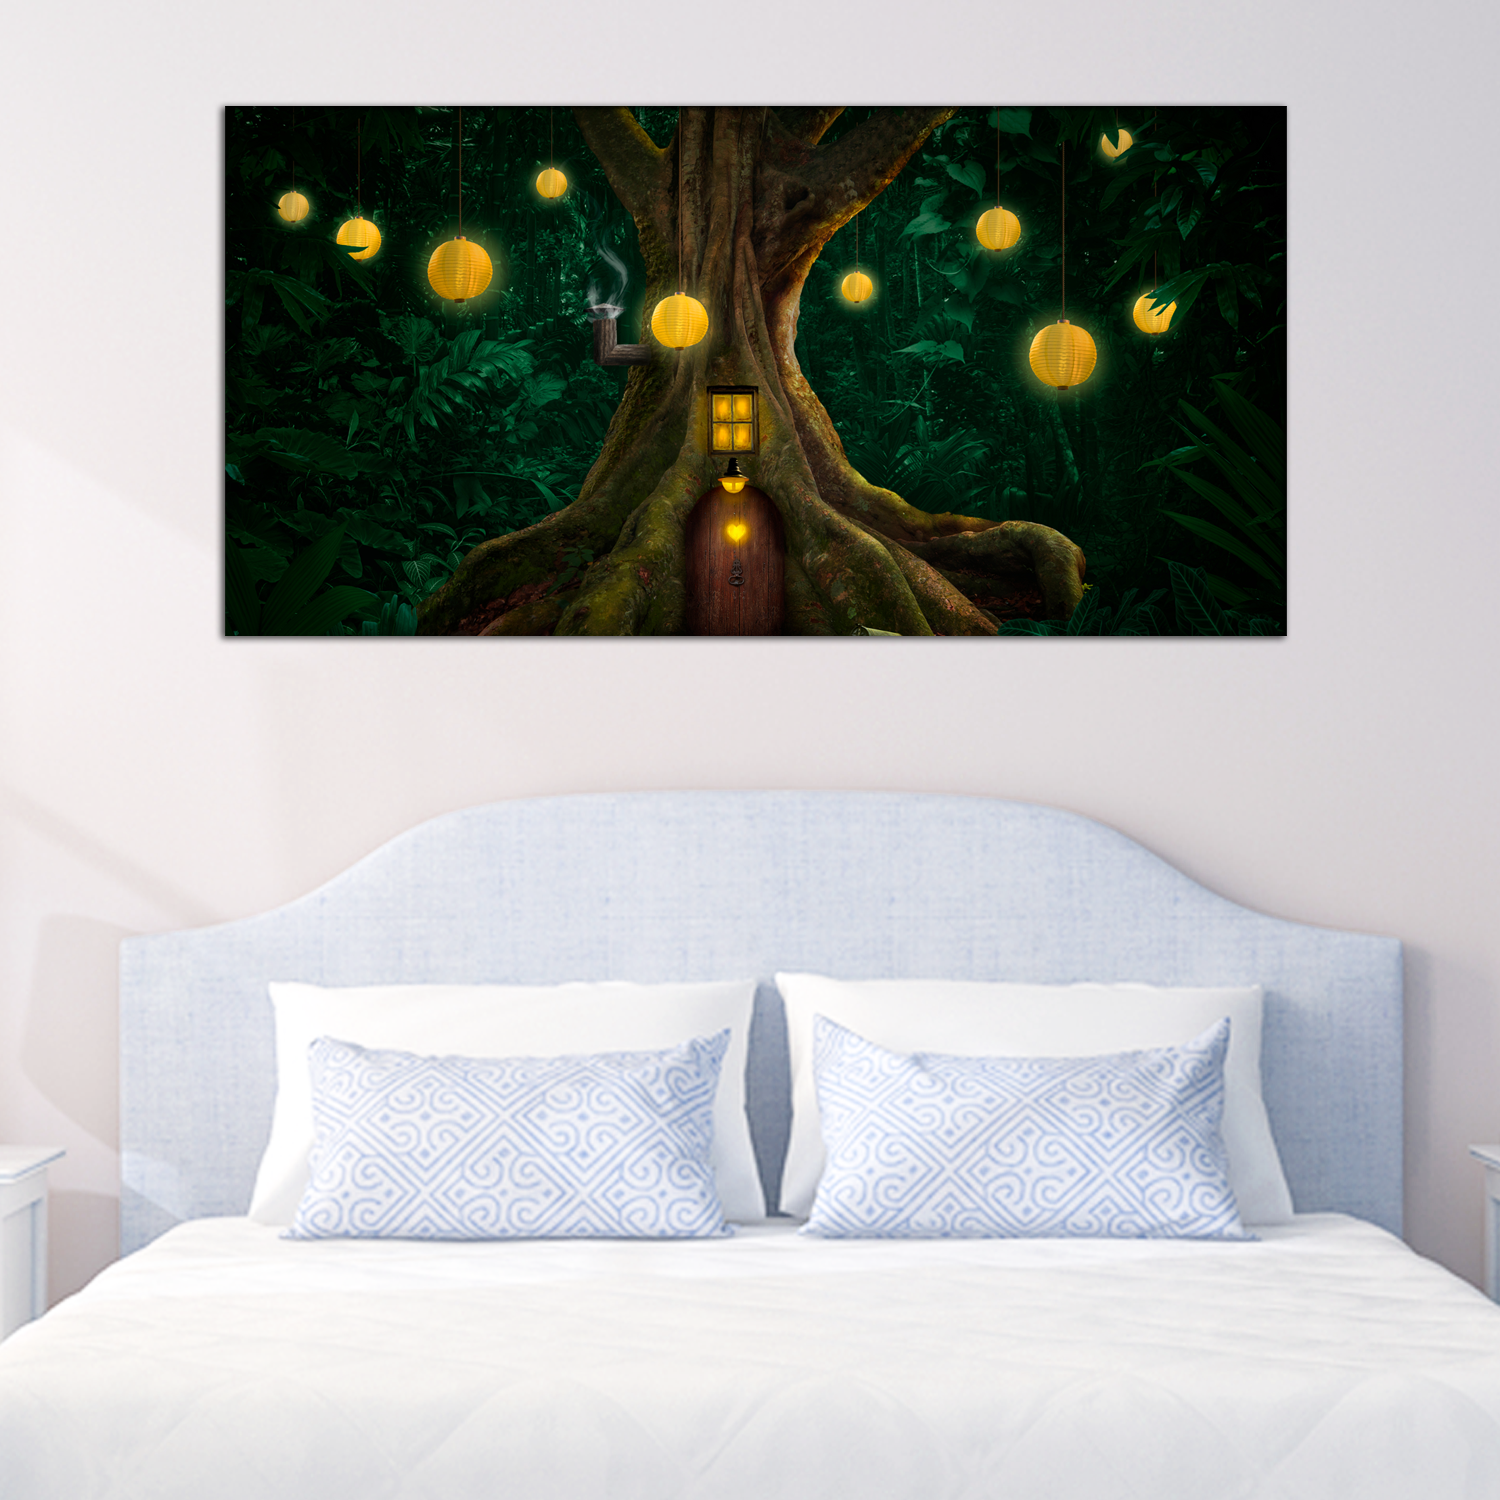 Gigantic Tree With House Canvas Print Wall Painting